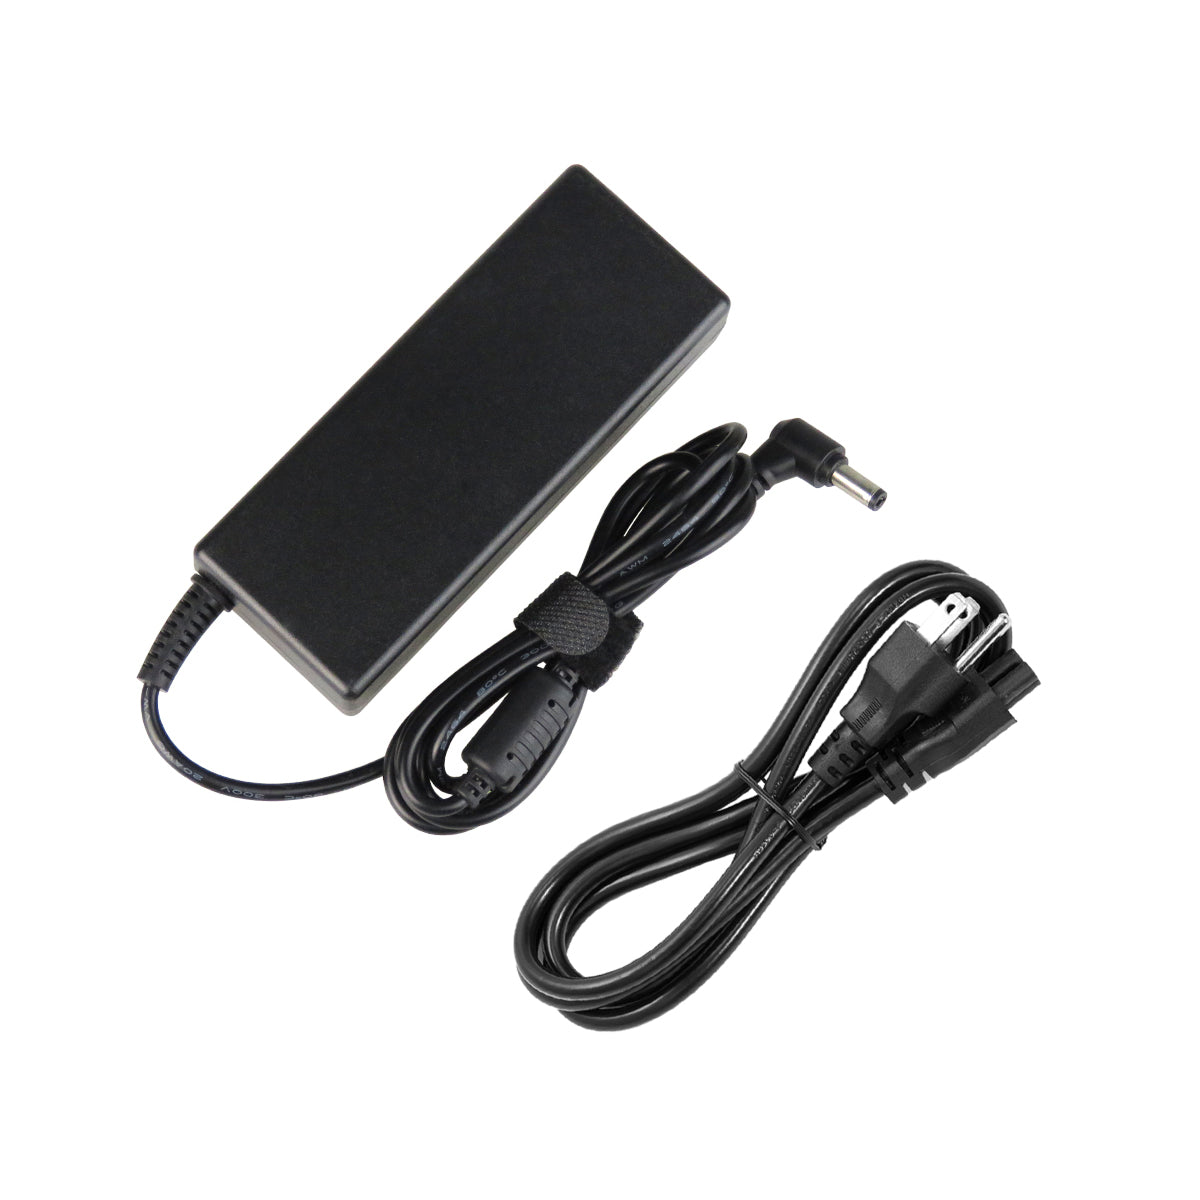 AC Adapter Charger for ASUS A83TA Laptop.